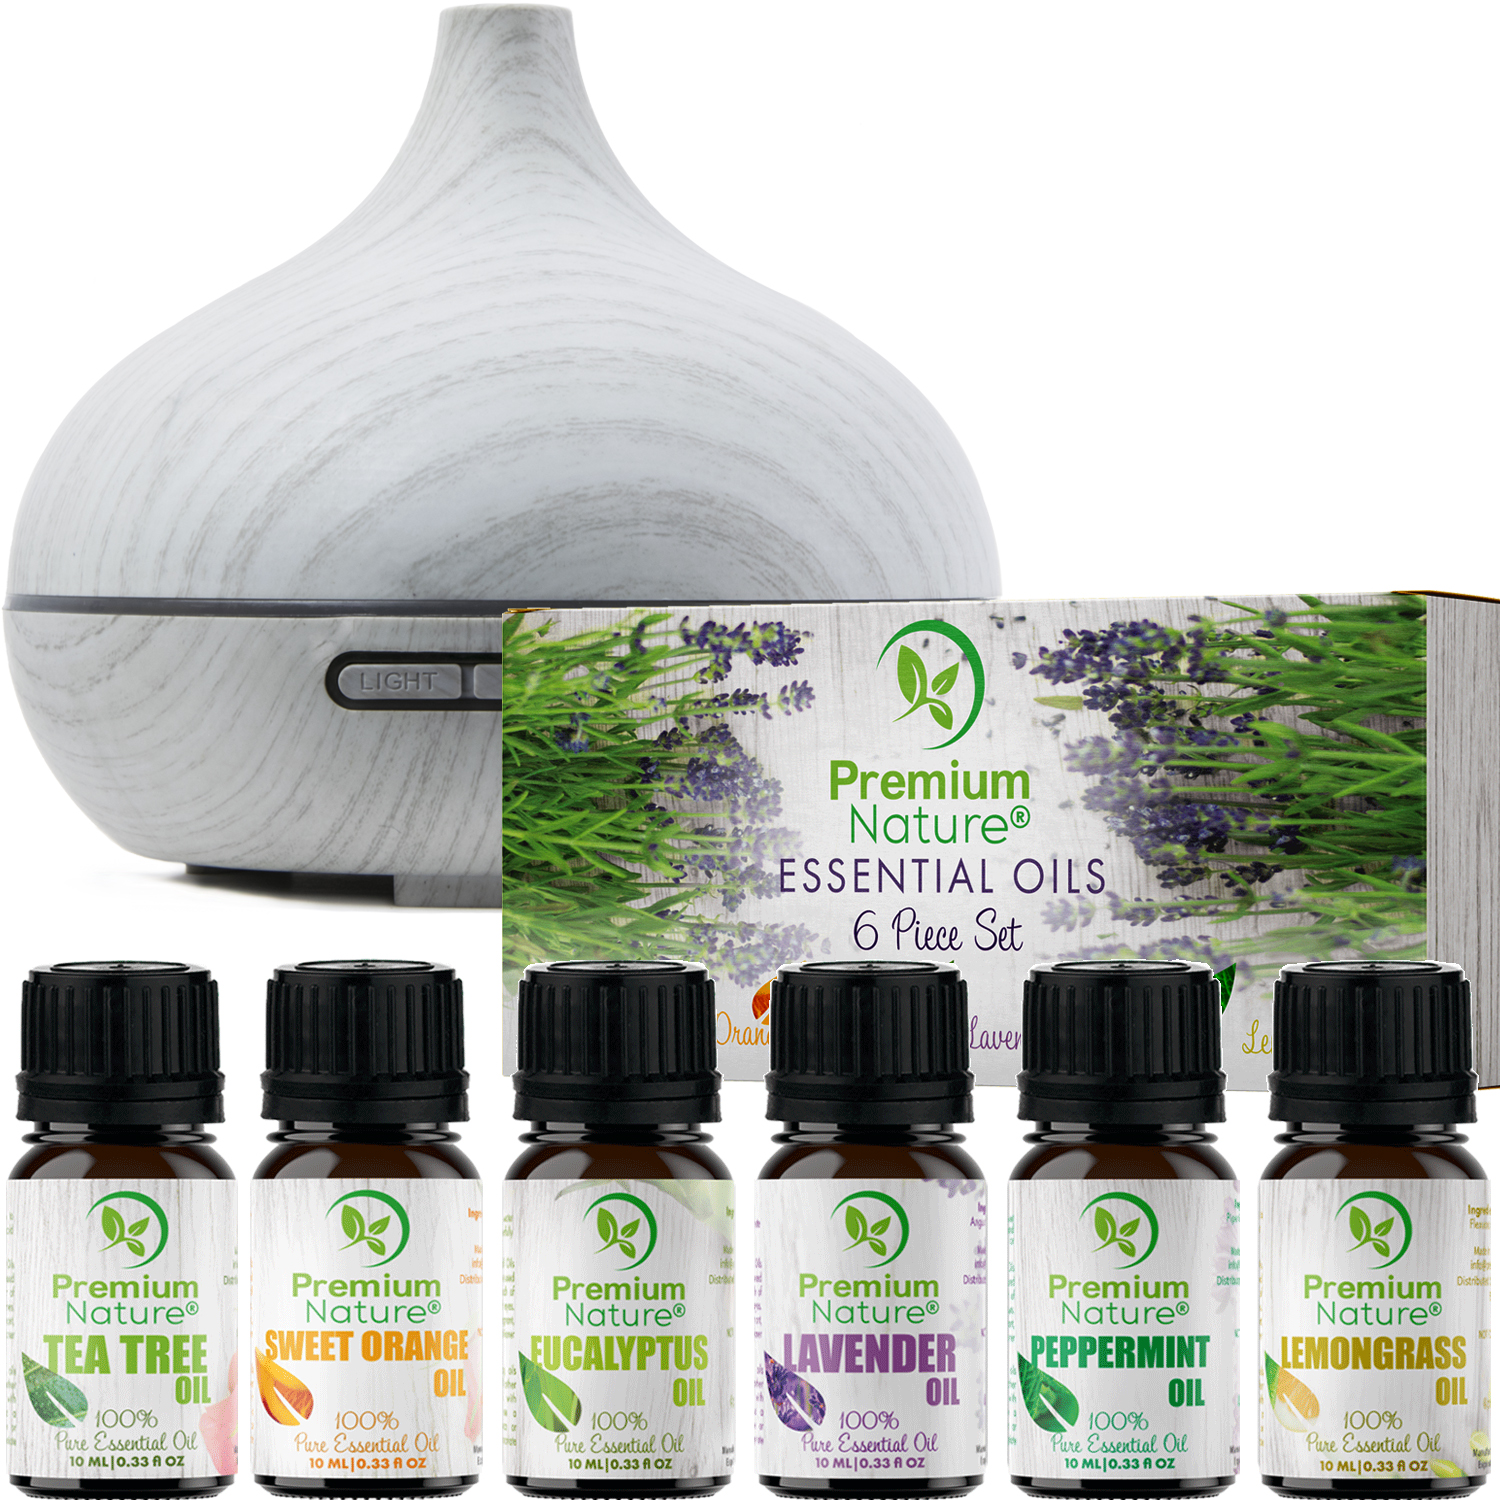 Aromatherapy Essential Oils & Diffuser Gift Set Limited Edition 2.0 - image 1 of 2